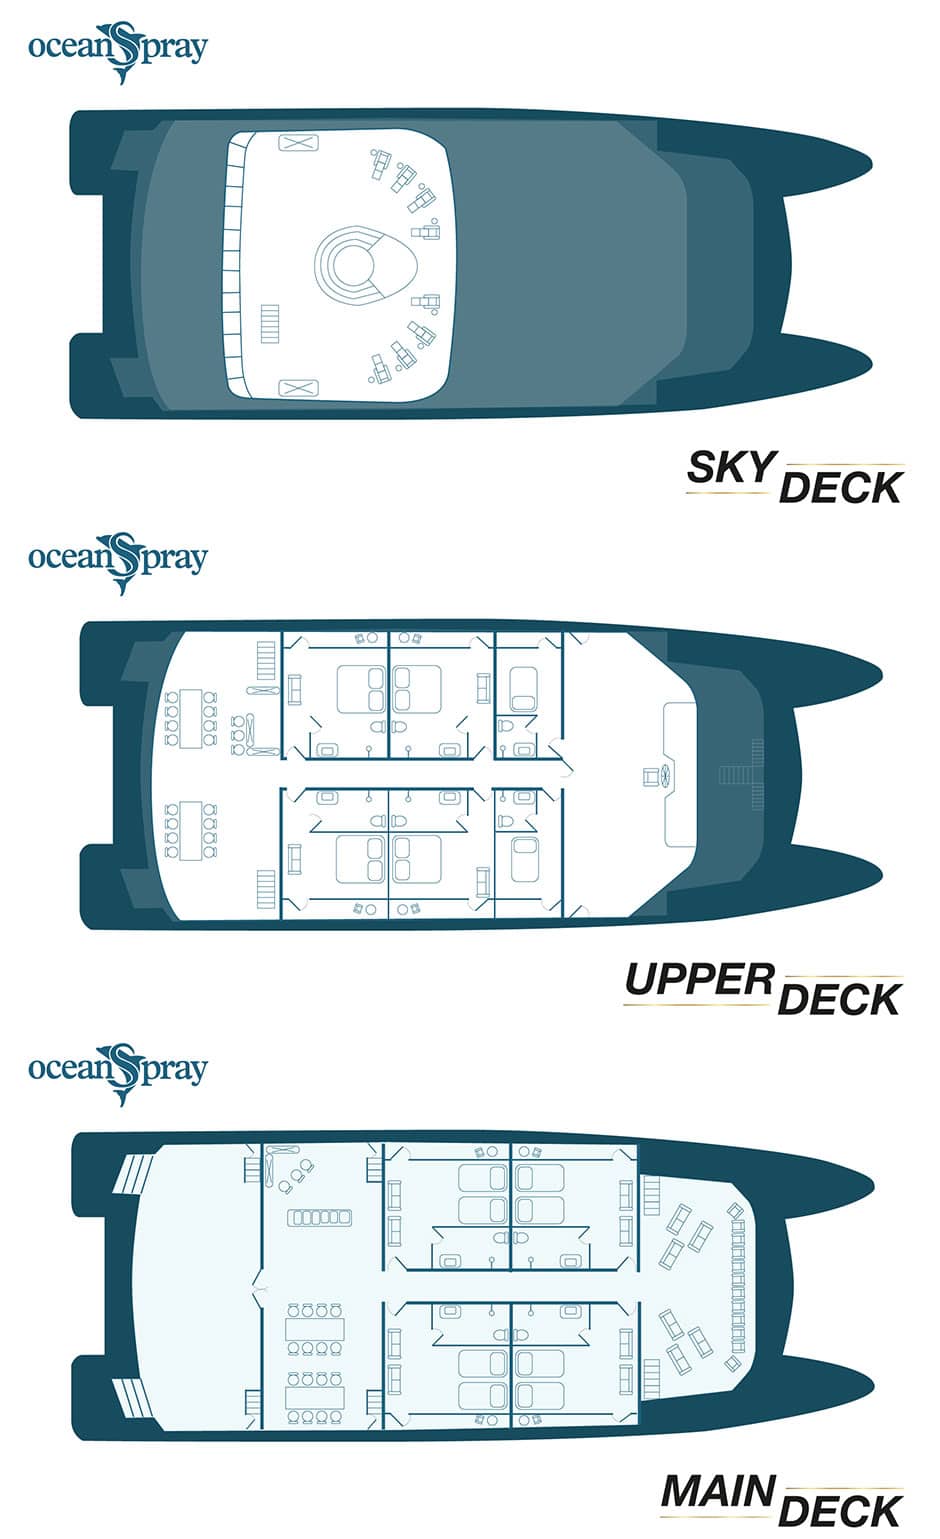 ocean spray small ship deck plan showing 3 decks, 2 with passenger cabins, 1 with a Jacuzzi.